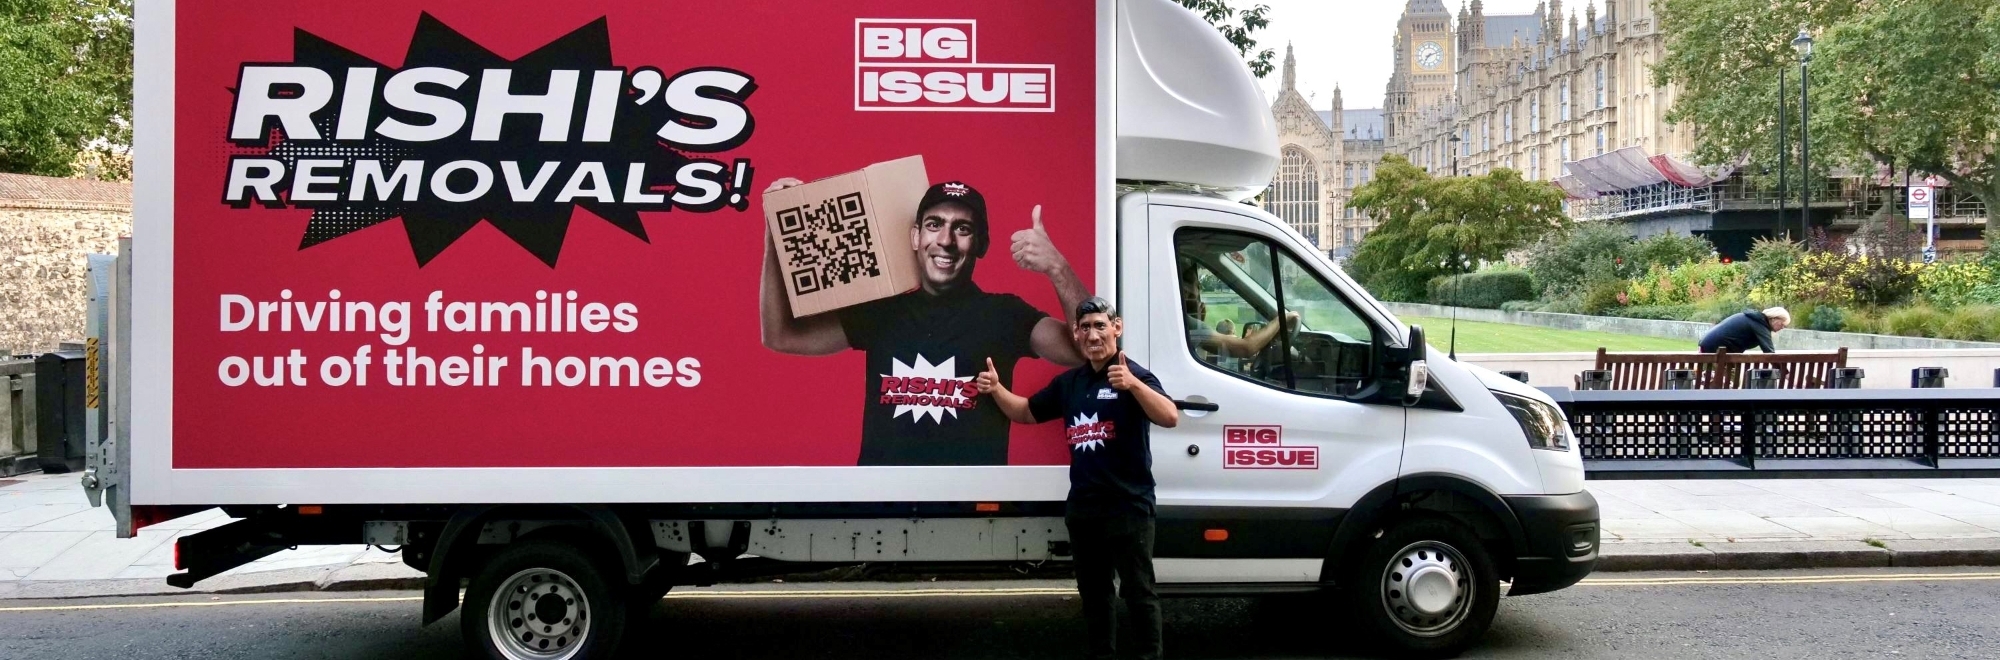 ‘Rishi’s Removals’: The Big Issue Group calls on UK government to end housing insecurity for millions of low-income renters